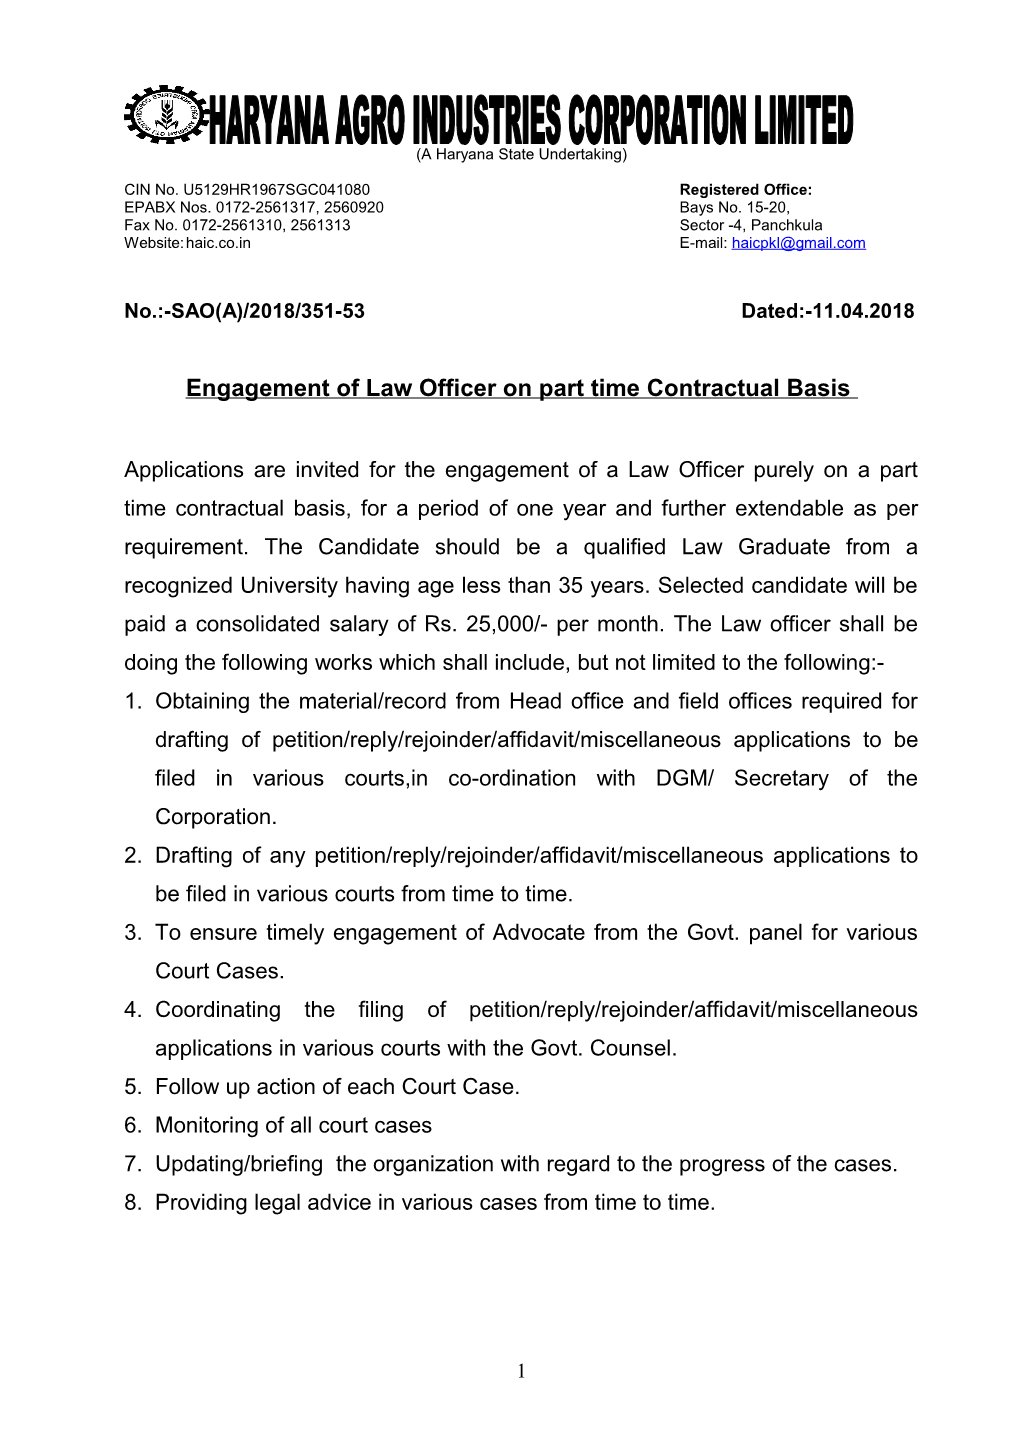 Engagement of Law Officer on Part Time Contractual Basis